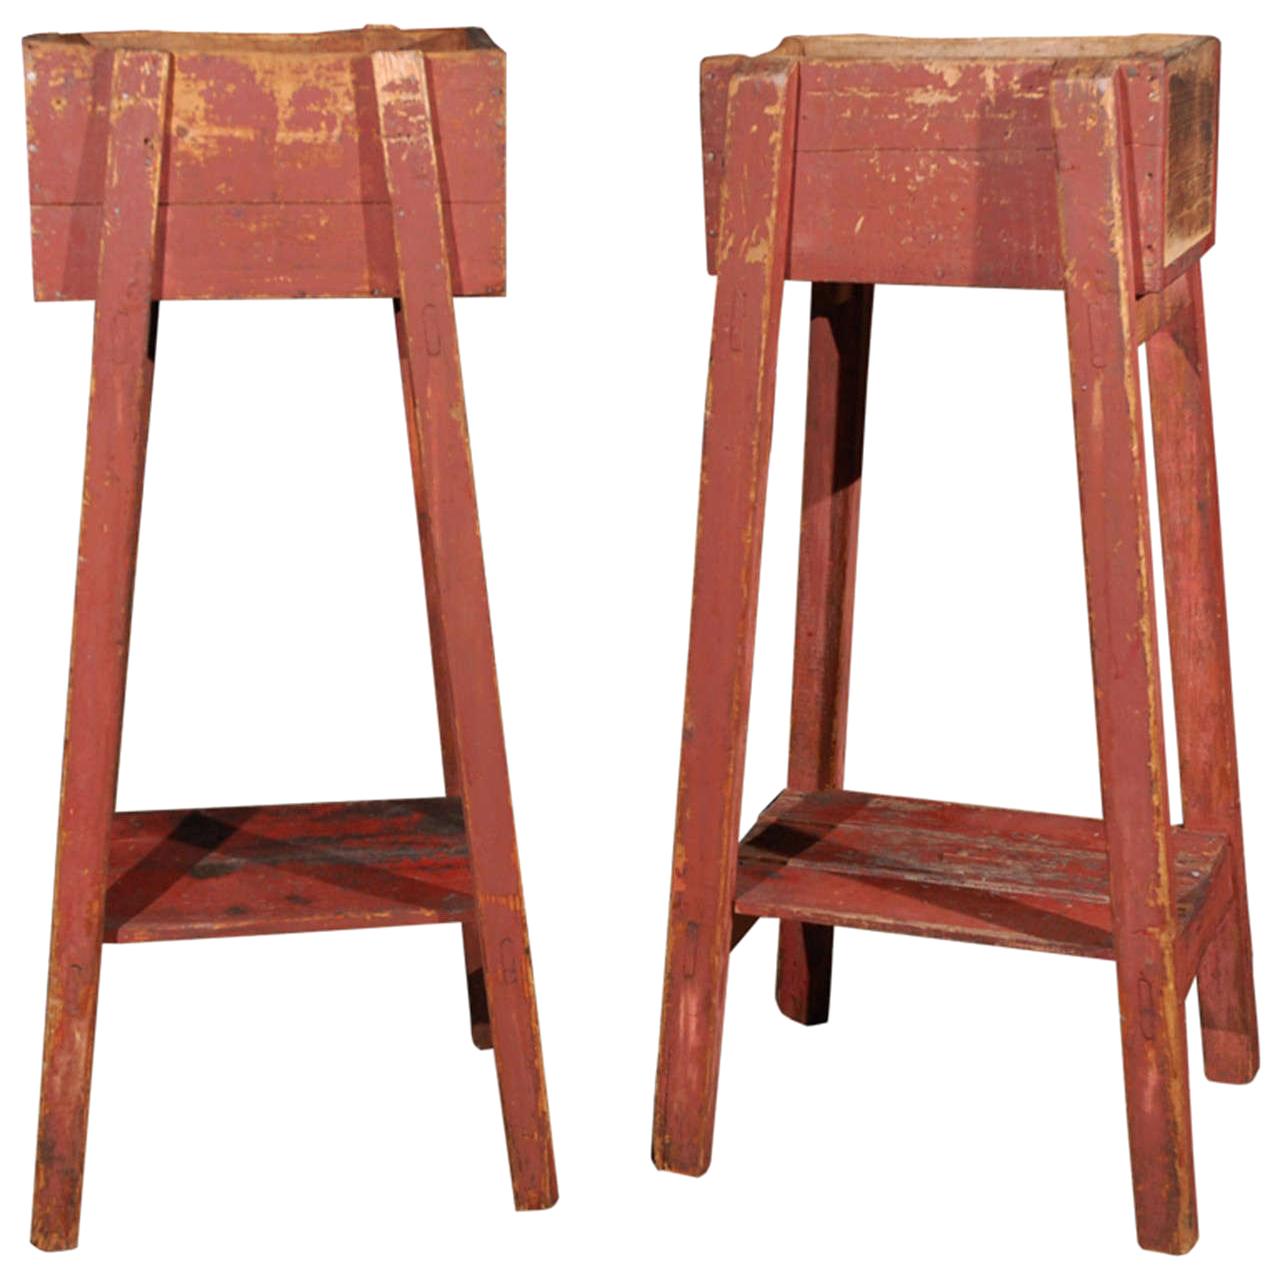 Pair of French Country Red Painted Wooden Planters on Long Splayed Legs